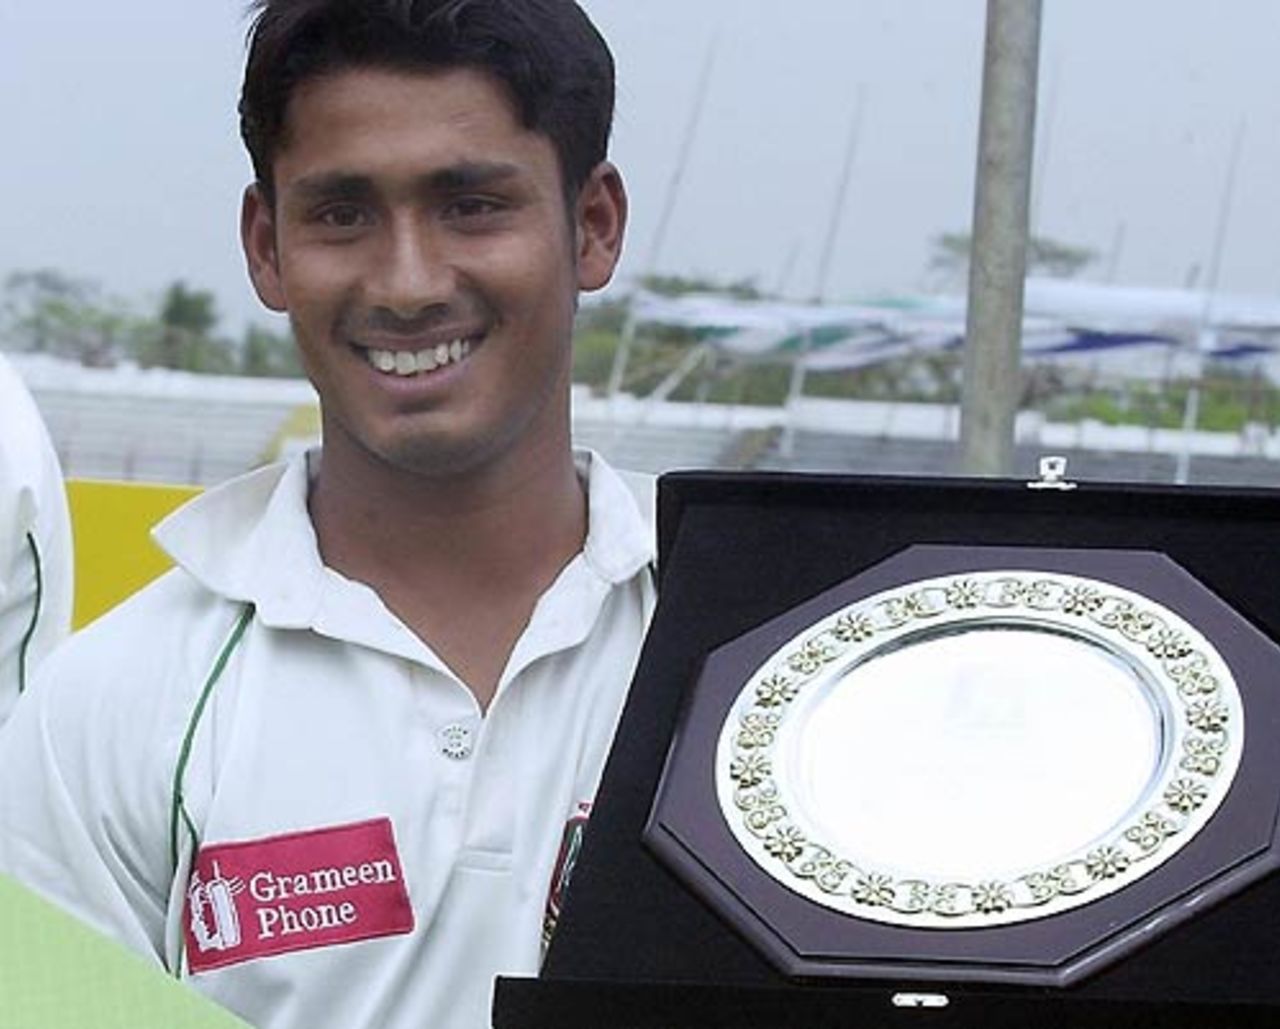 Mohammad Ashraful with the man-of-the-match trophy for his 136, Bangladesh v Sri Lanka, 1st Test, Chittagong, 4th day, March 3 2006